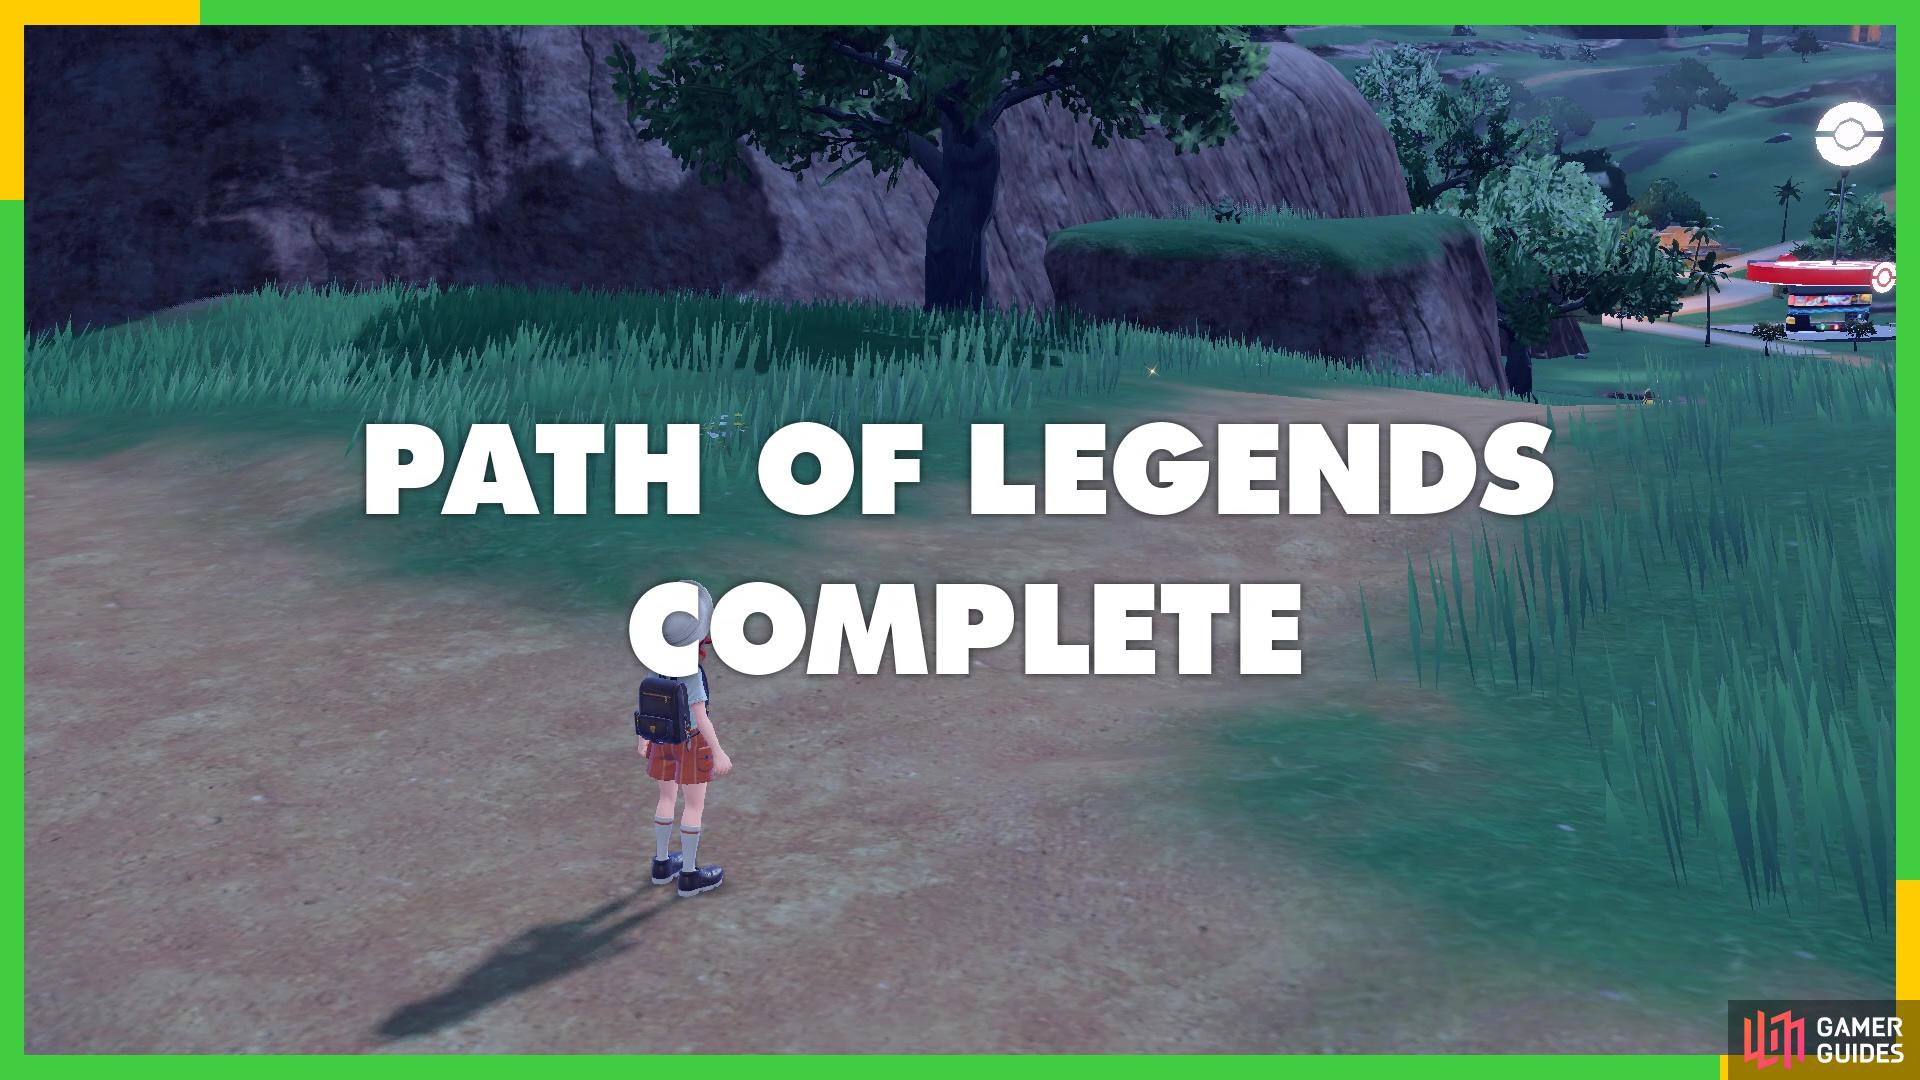 The Path of Legends is complete!